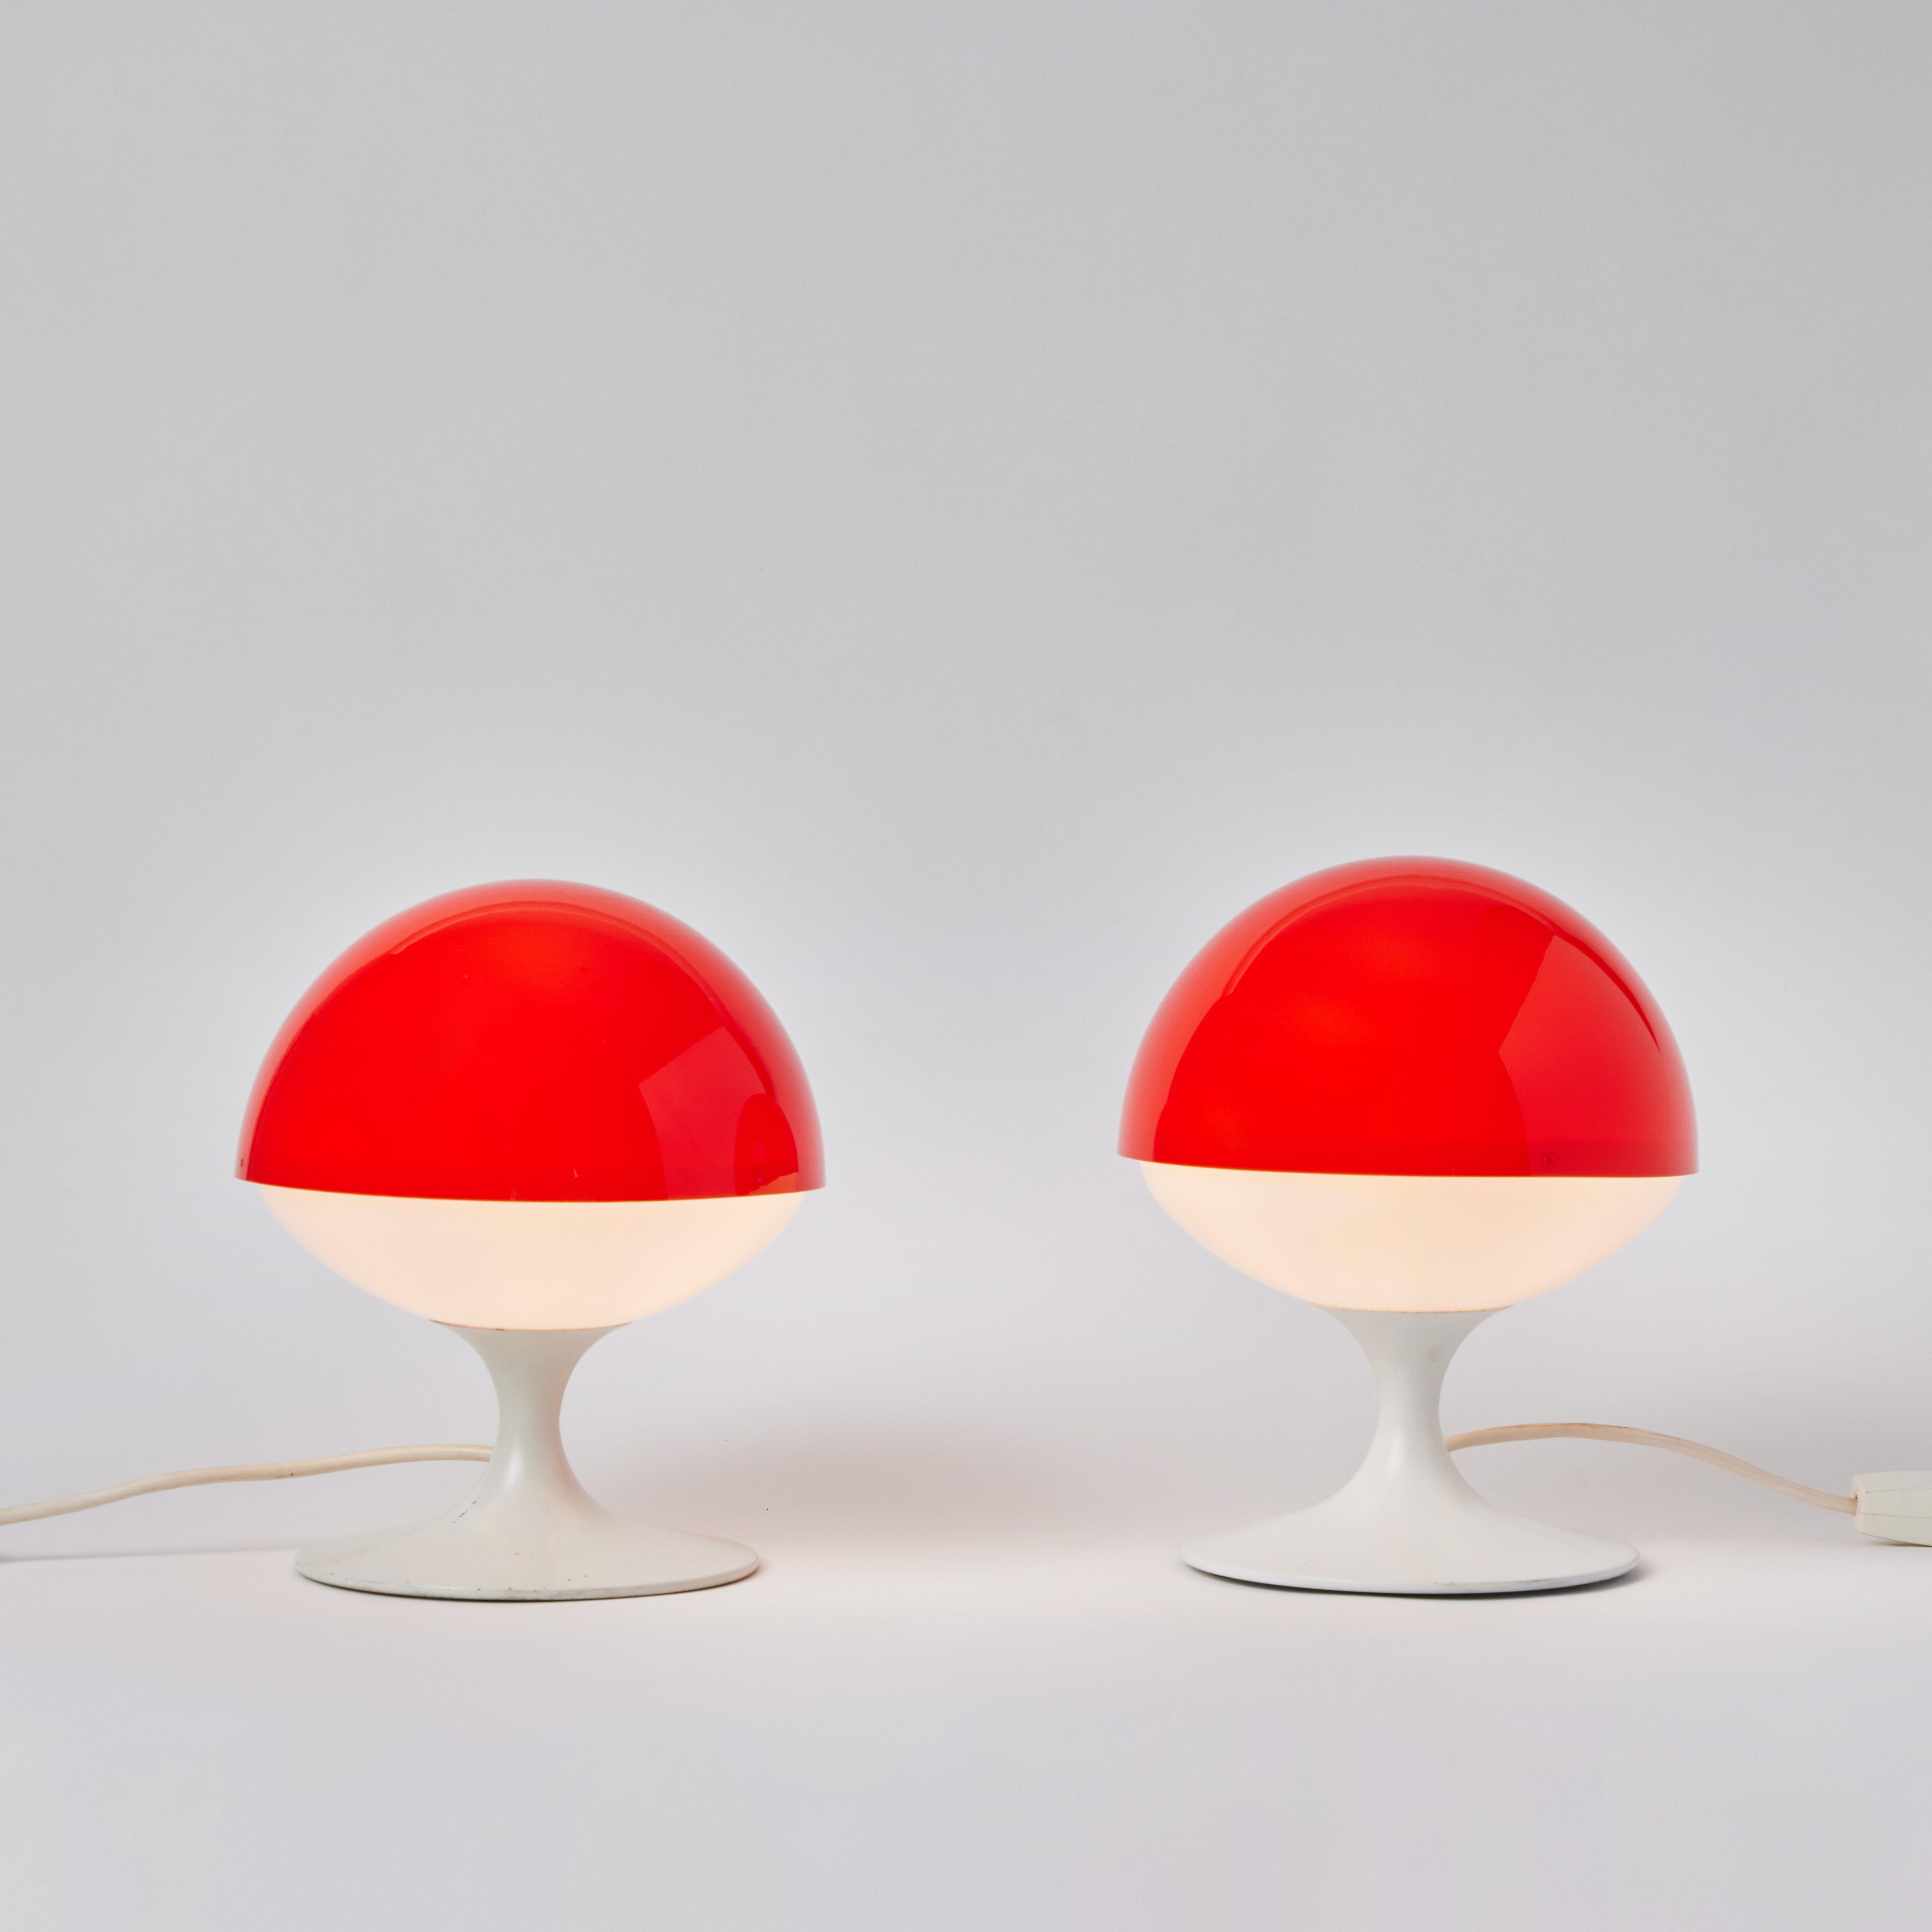 Pair of 1960s Max Bill Red & White Table Lamps for Temde Leuchten, Switzerland In Good Condition For Sale In Glendale, CA